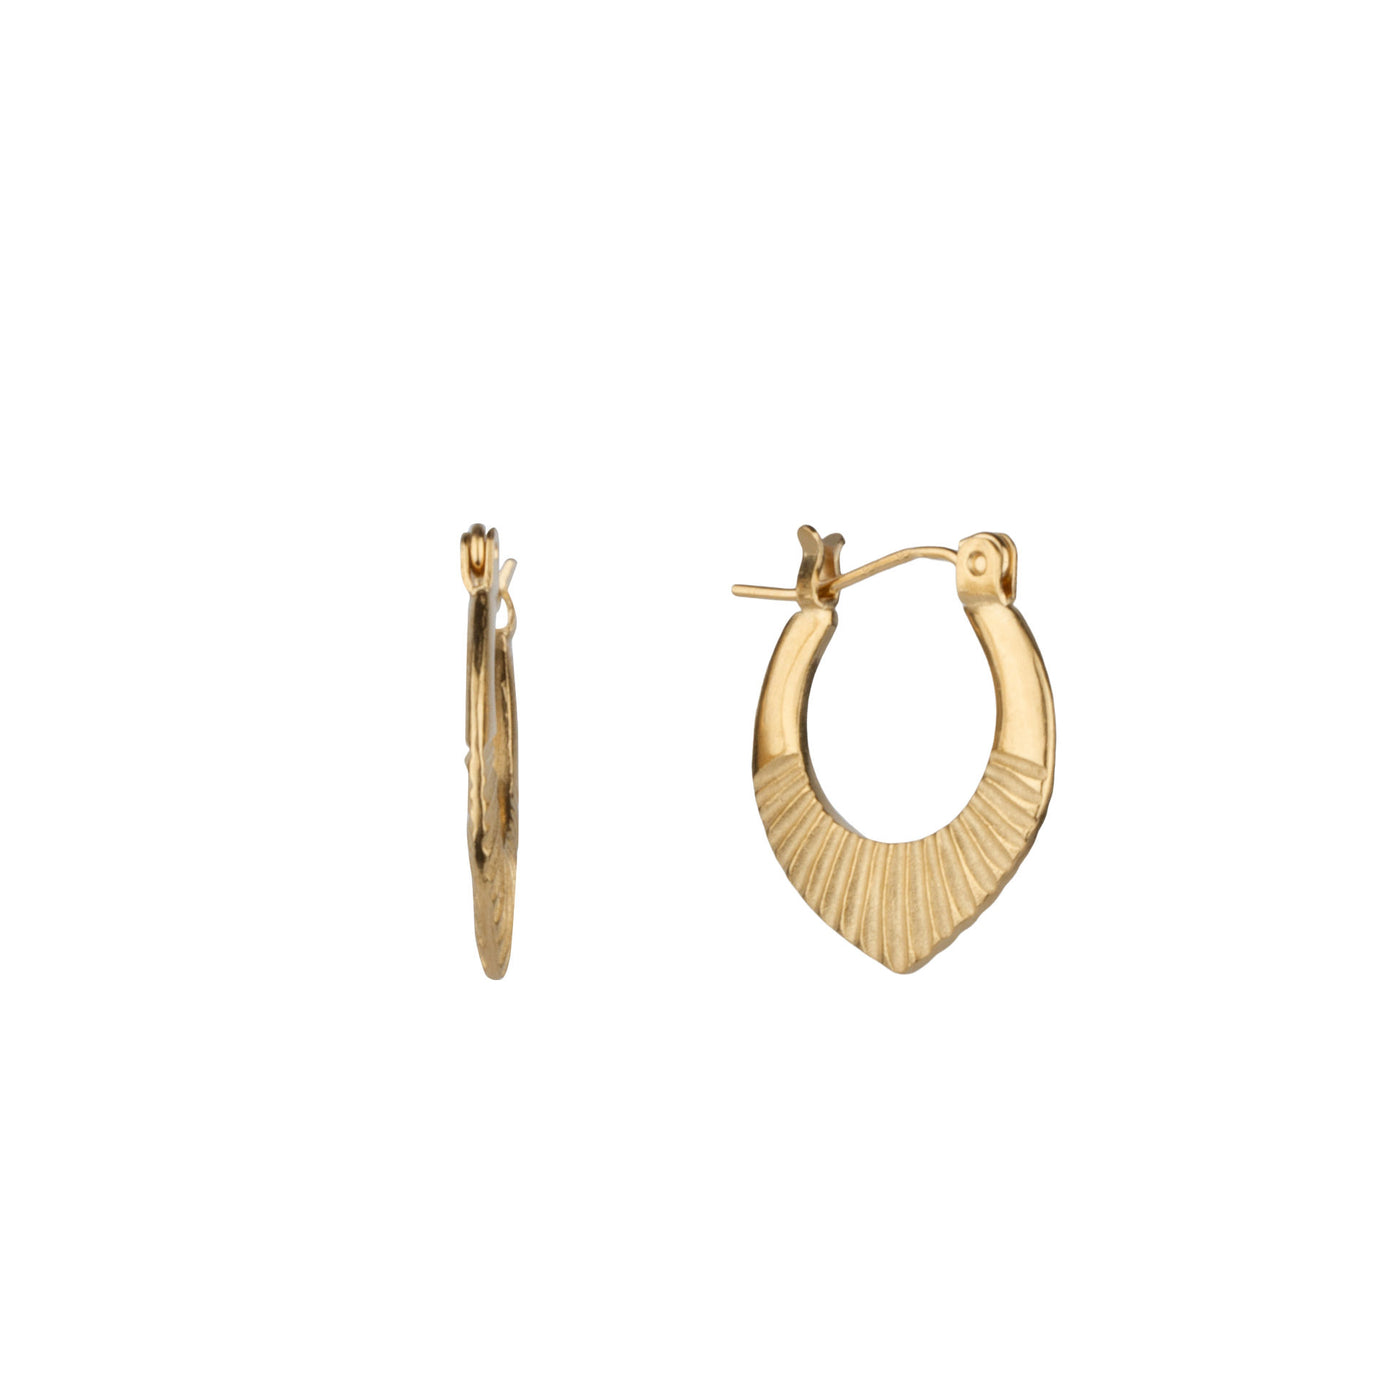 Gold Vermeil Small Oblong hoops with hinge closure and sunburst bottom by Corey Egan side view on a white background